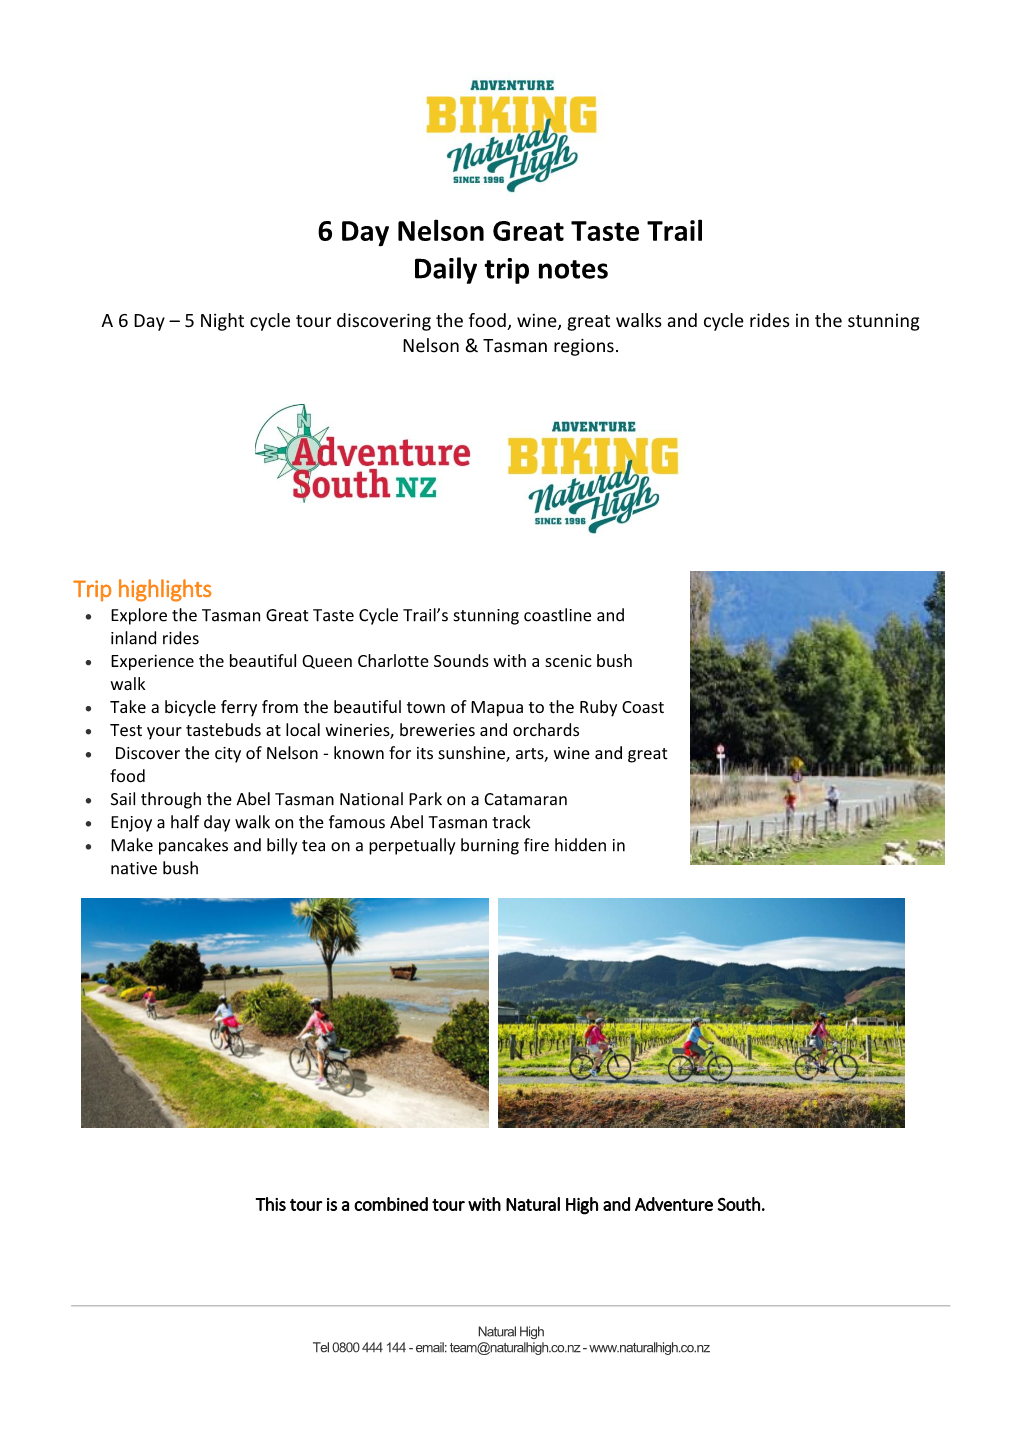 6 Day Nelson Great Taste Trail Daily Trip Notes